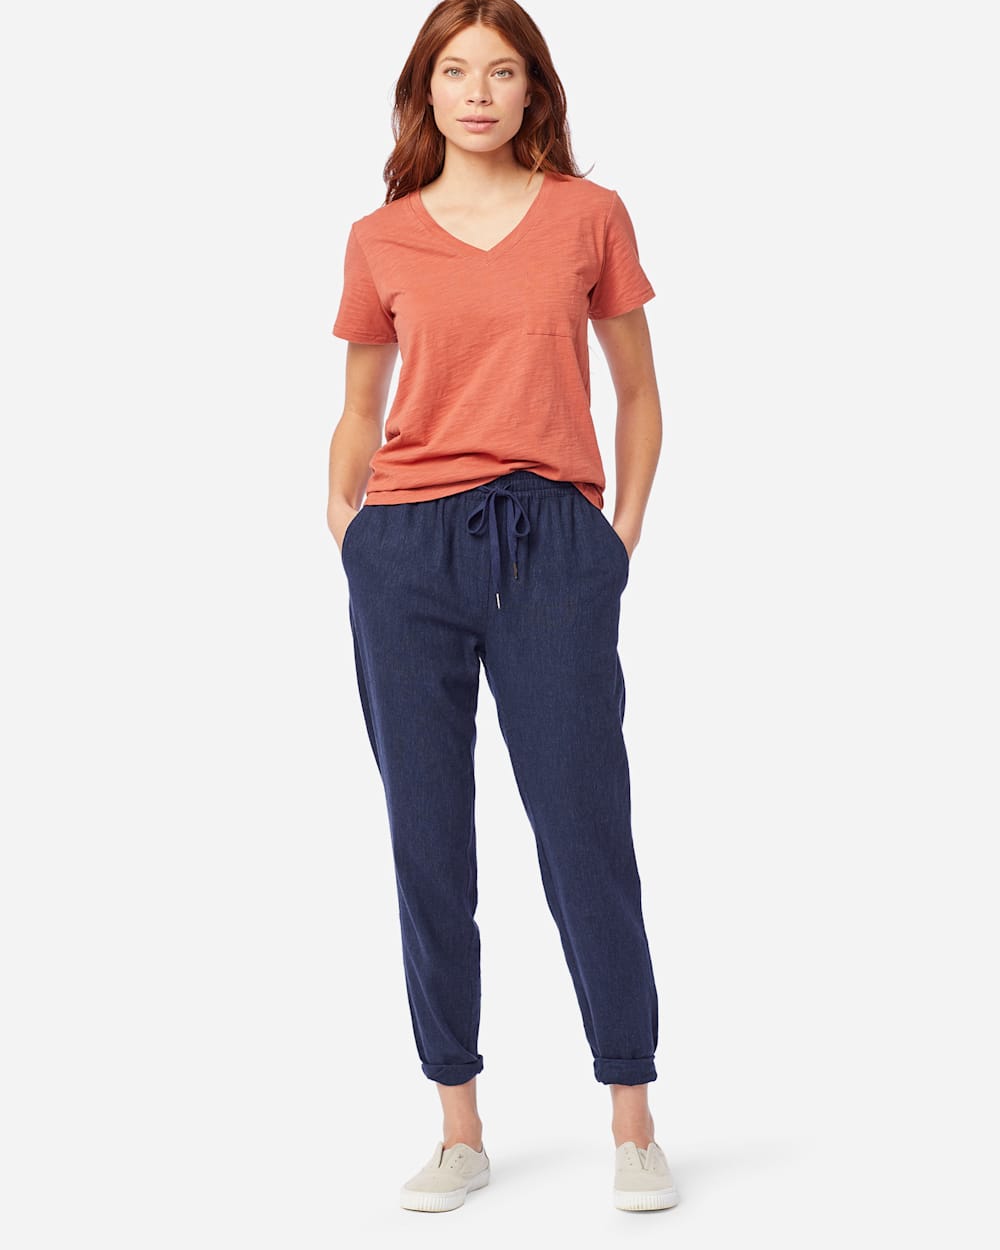 WOMEN'S WASHED LINEN PANTS IN NAVY MIX image number 1